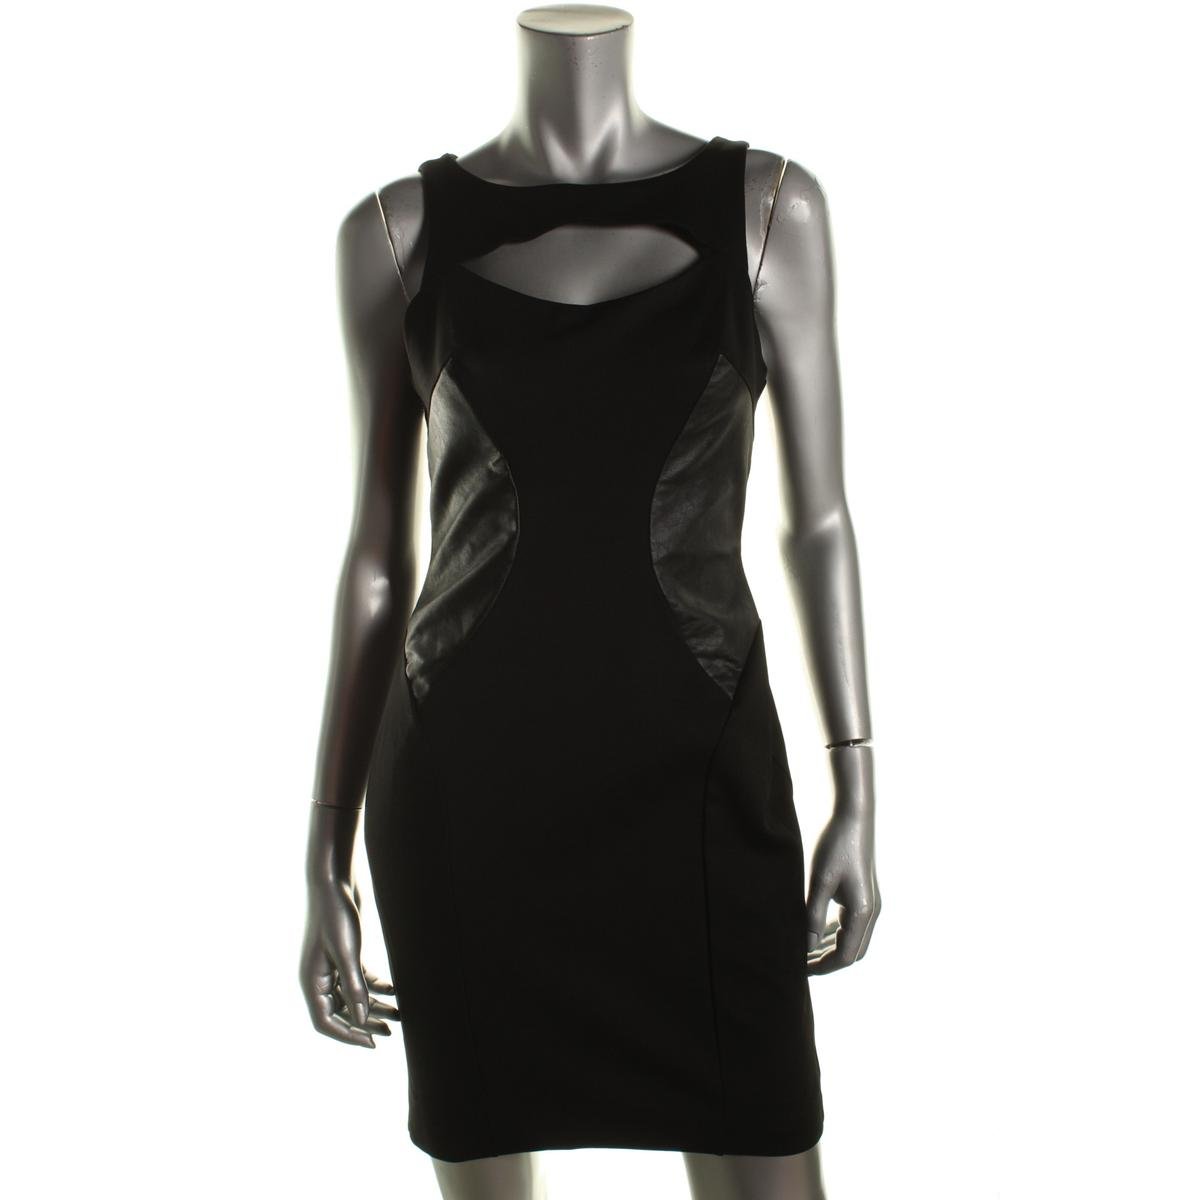 Wyatt 7567 Womens Black Faux Leather Cut-Out Party Cocktail Dress XS BHFO